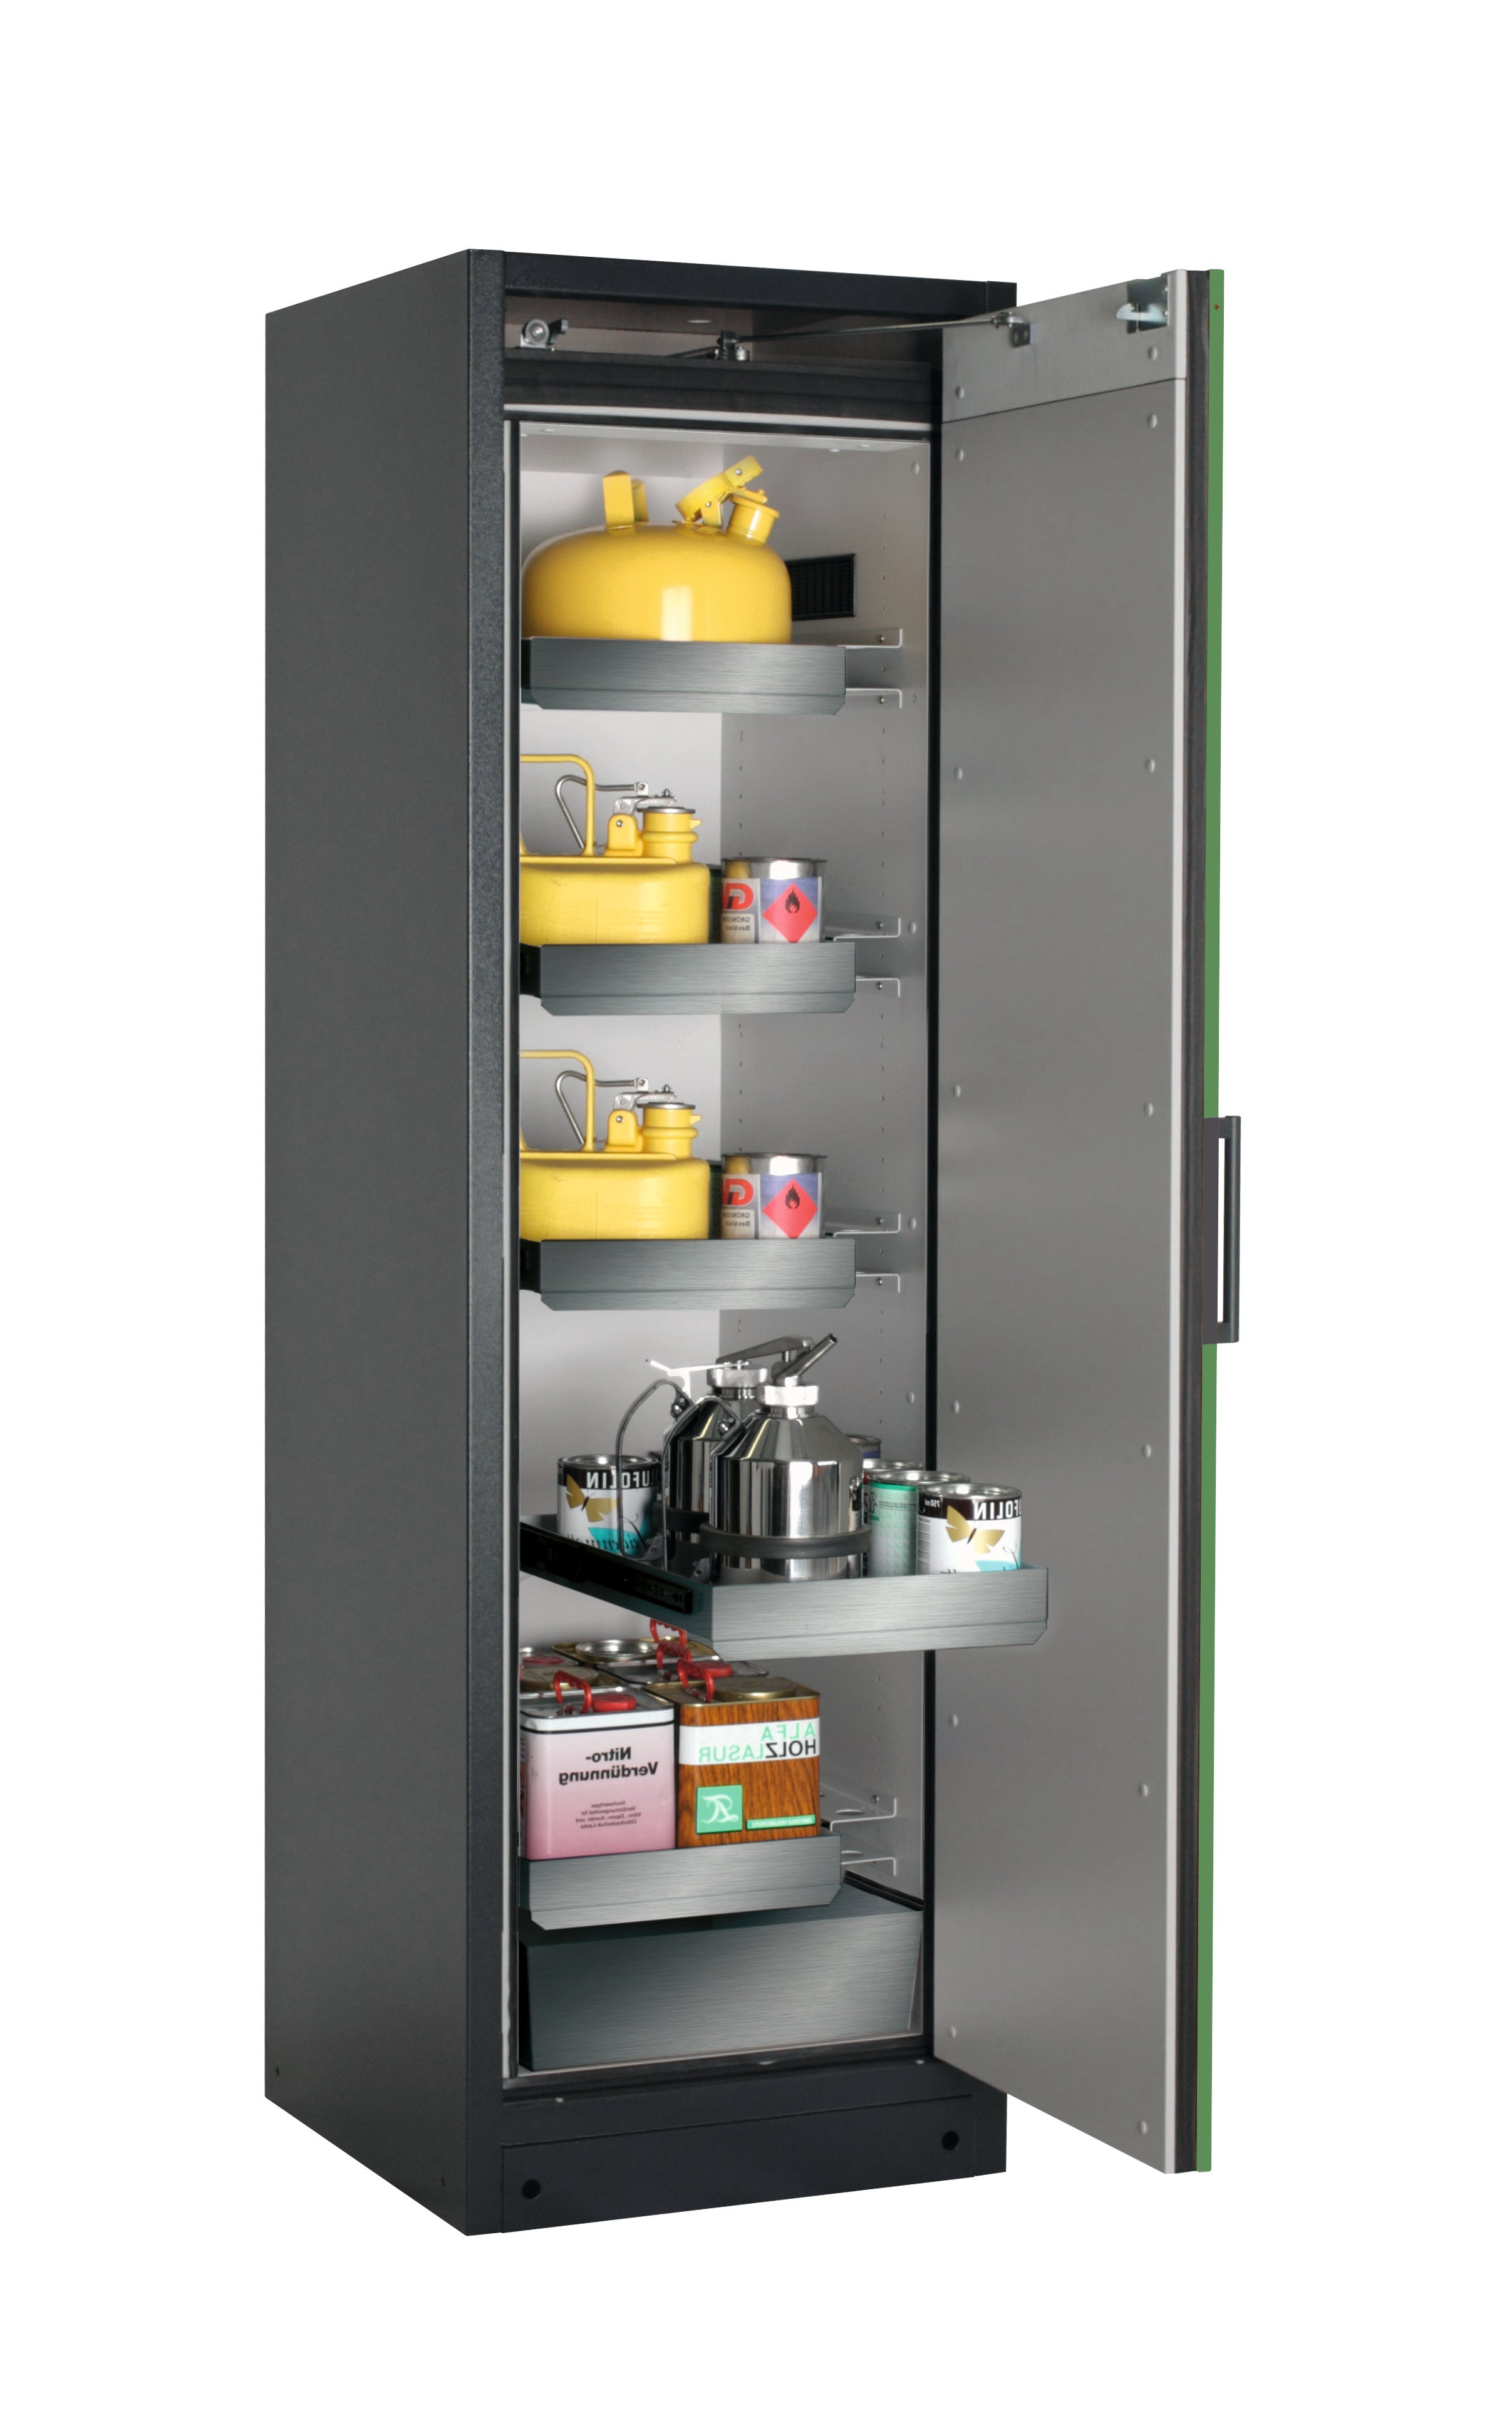 Type 90 safety storage cabinet Q-CLASSIC-90 model Q90.195.060.R in reseda green RAL 6011 with 4x drawer (standard) (stainless steel 1.4301),